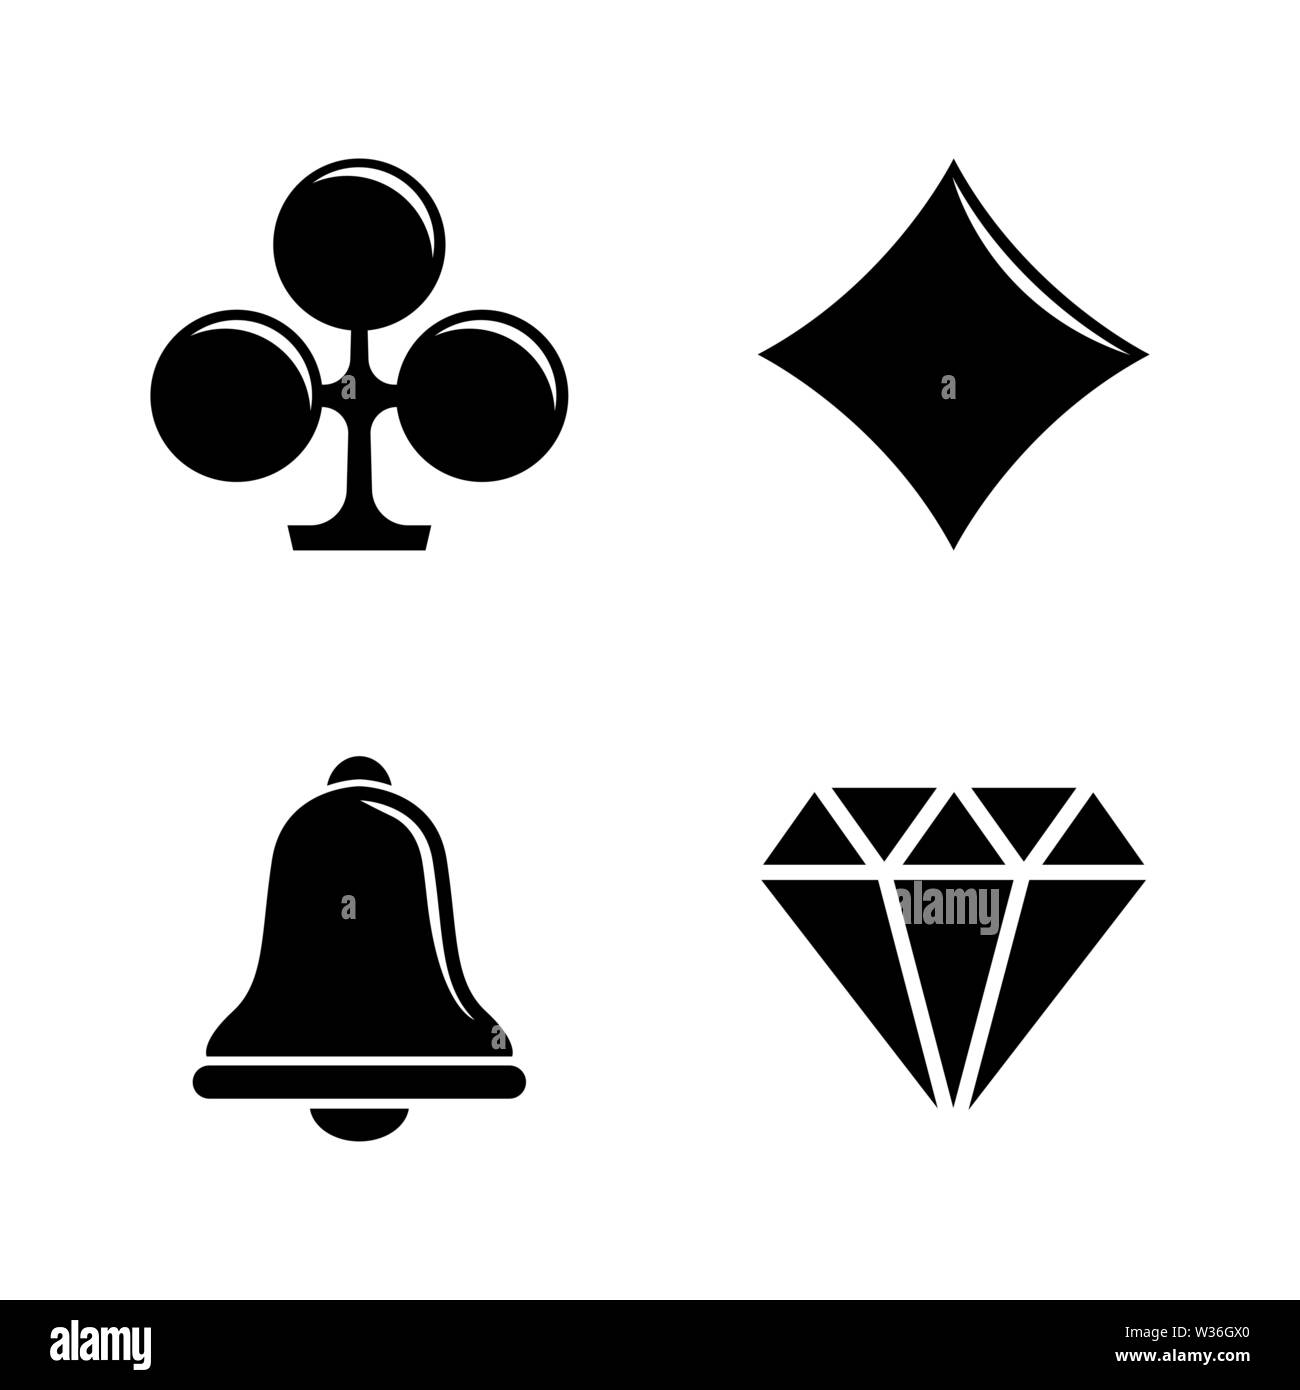 Slot Machine, Casino. Simple Related Vector Icons Set for Video, Mobile Apps, Web Sites, Print Projects and Your Design. Slot Machine, Casino icon Bla Stock Vector